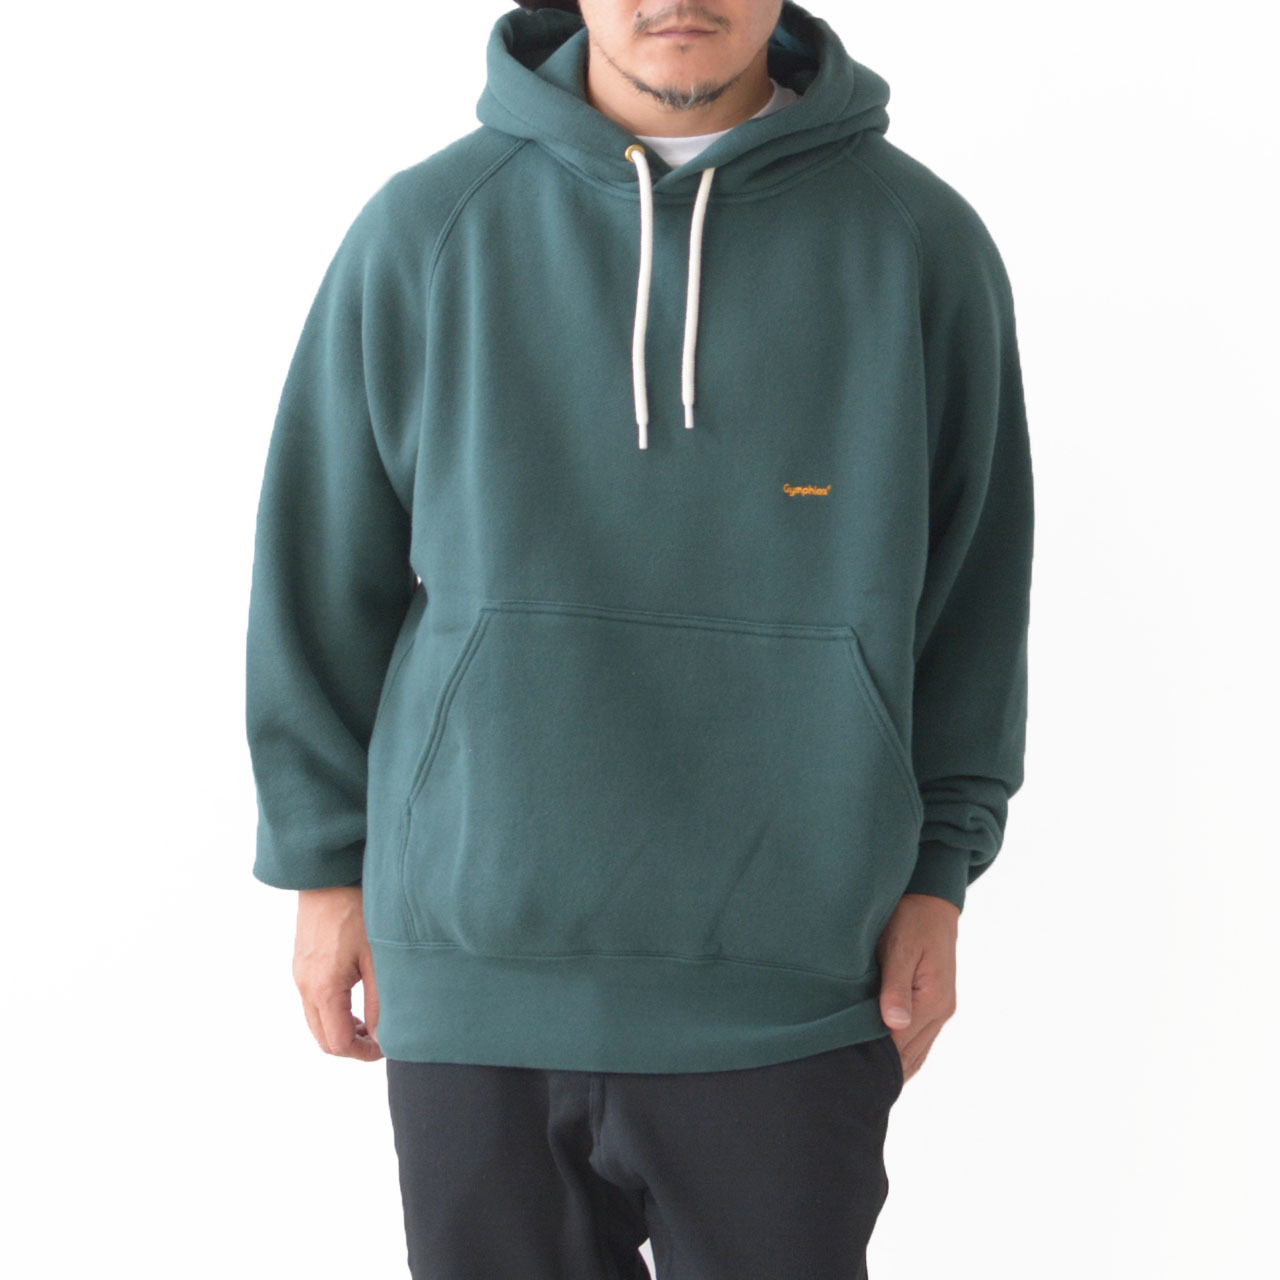 Gymphlex [ジムフレックス] SWING SLEEVE PULLOVER HOODIE [GY-C0014 ARB]_f0051306_13541432.jpg